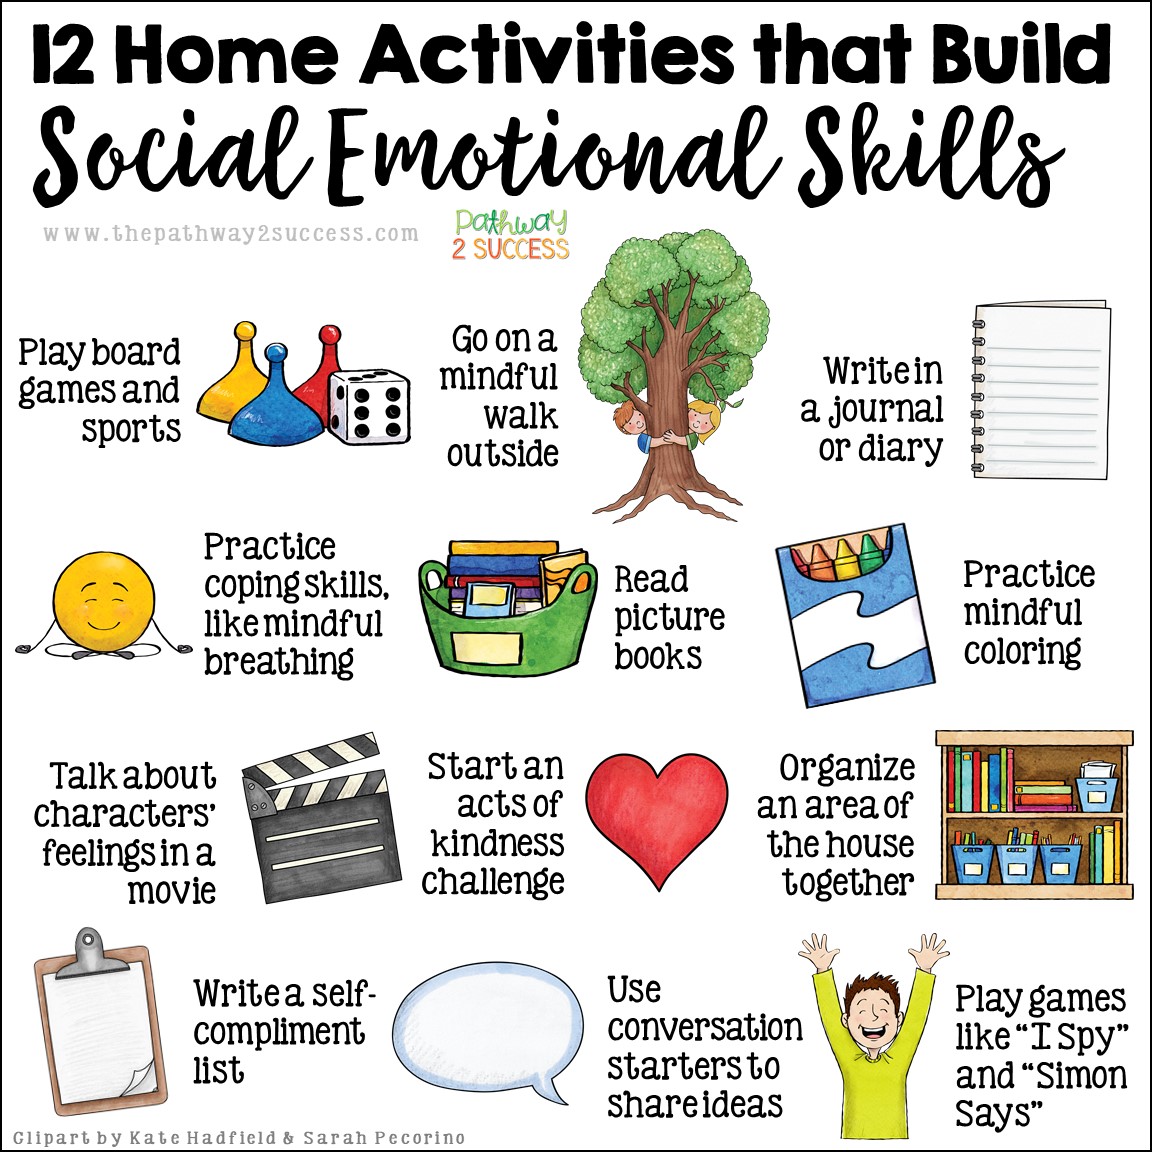 social emotional learning activities